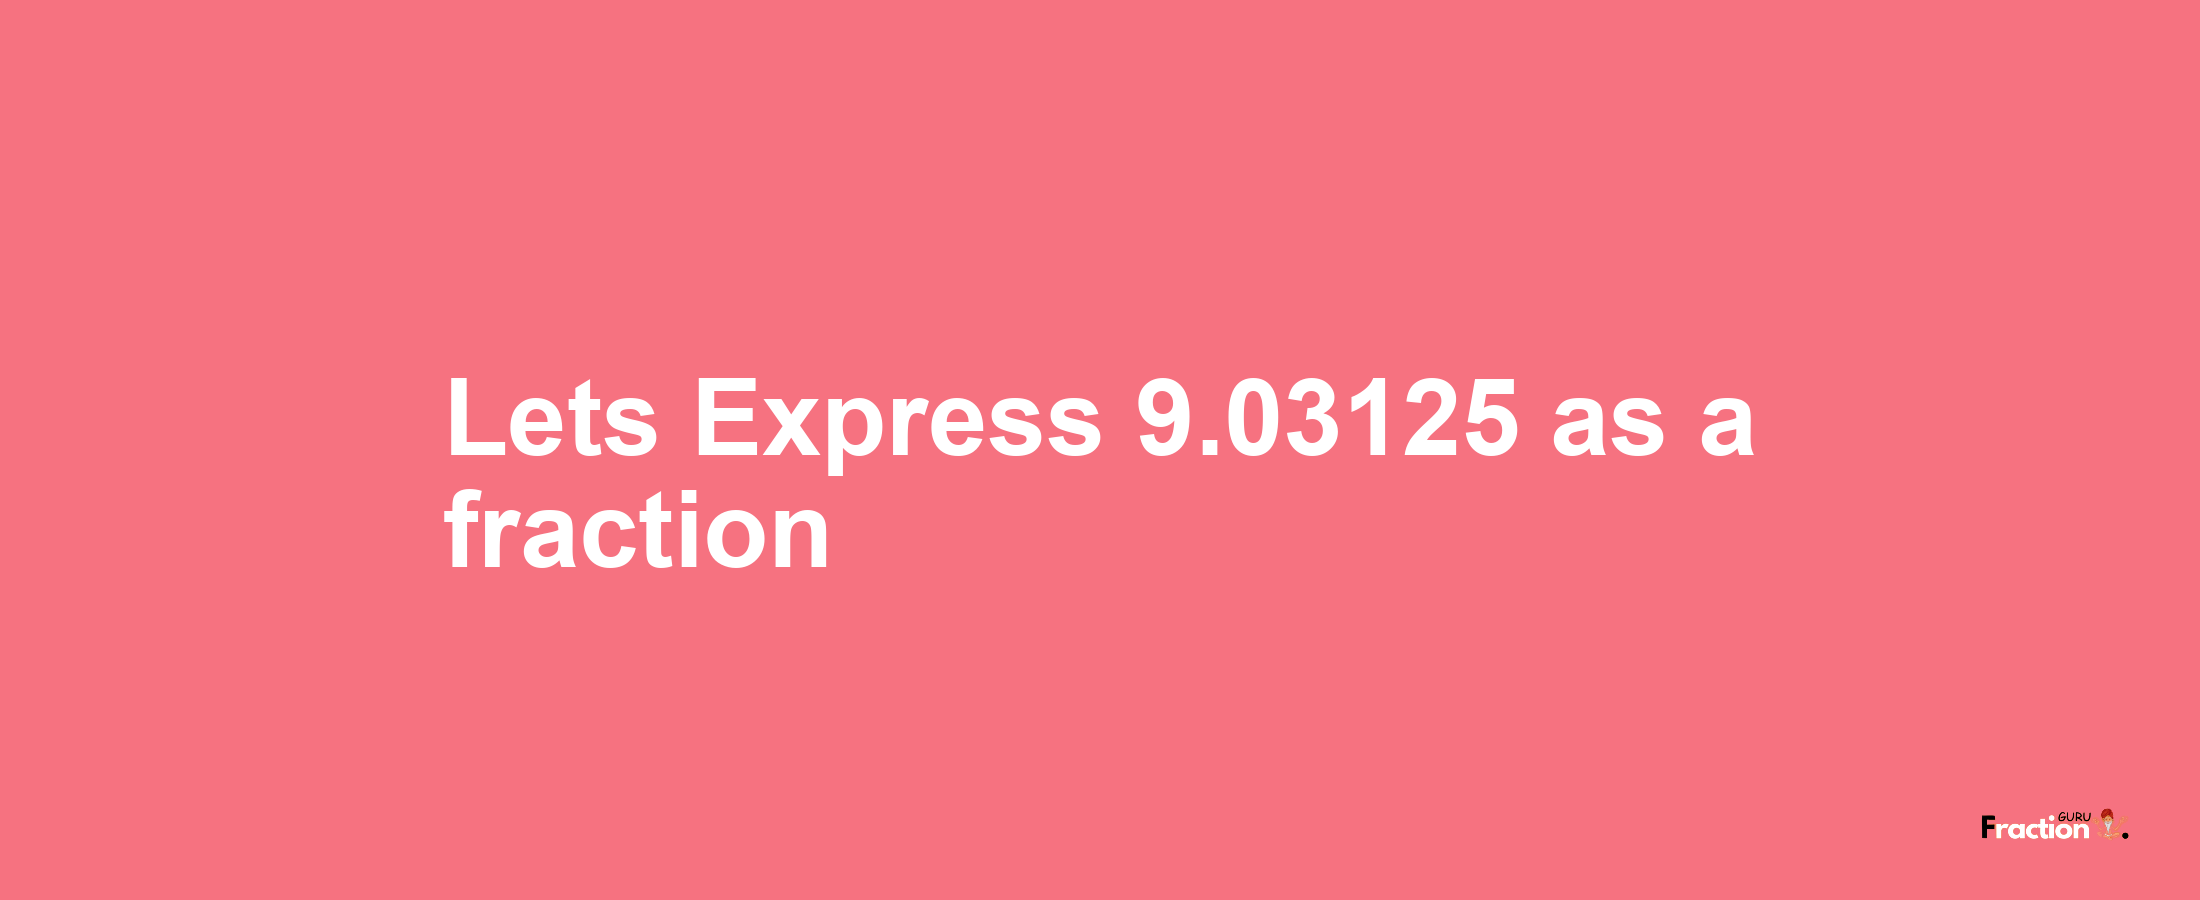 Lets Express 9.03125 as afraction